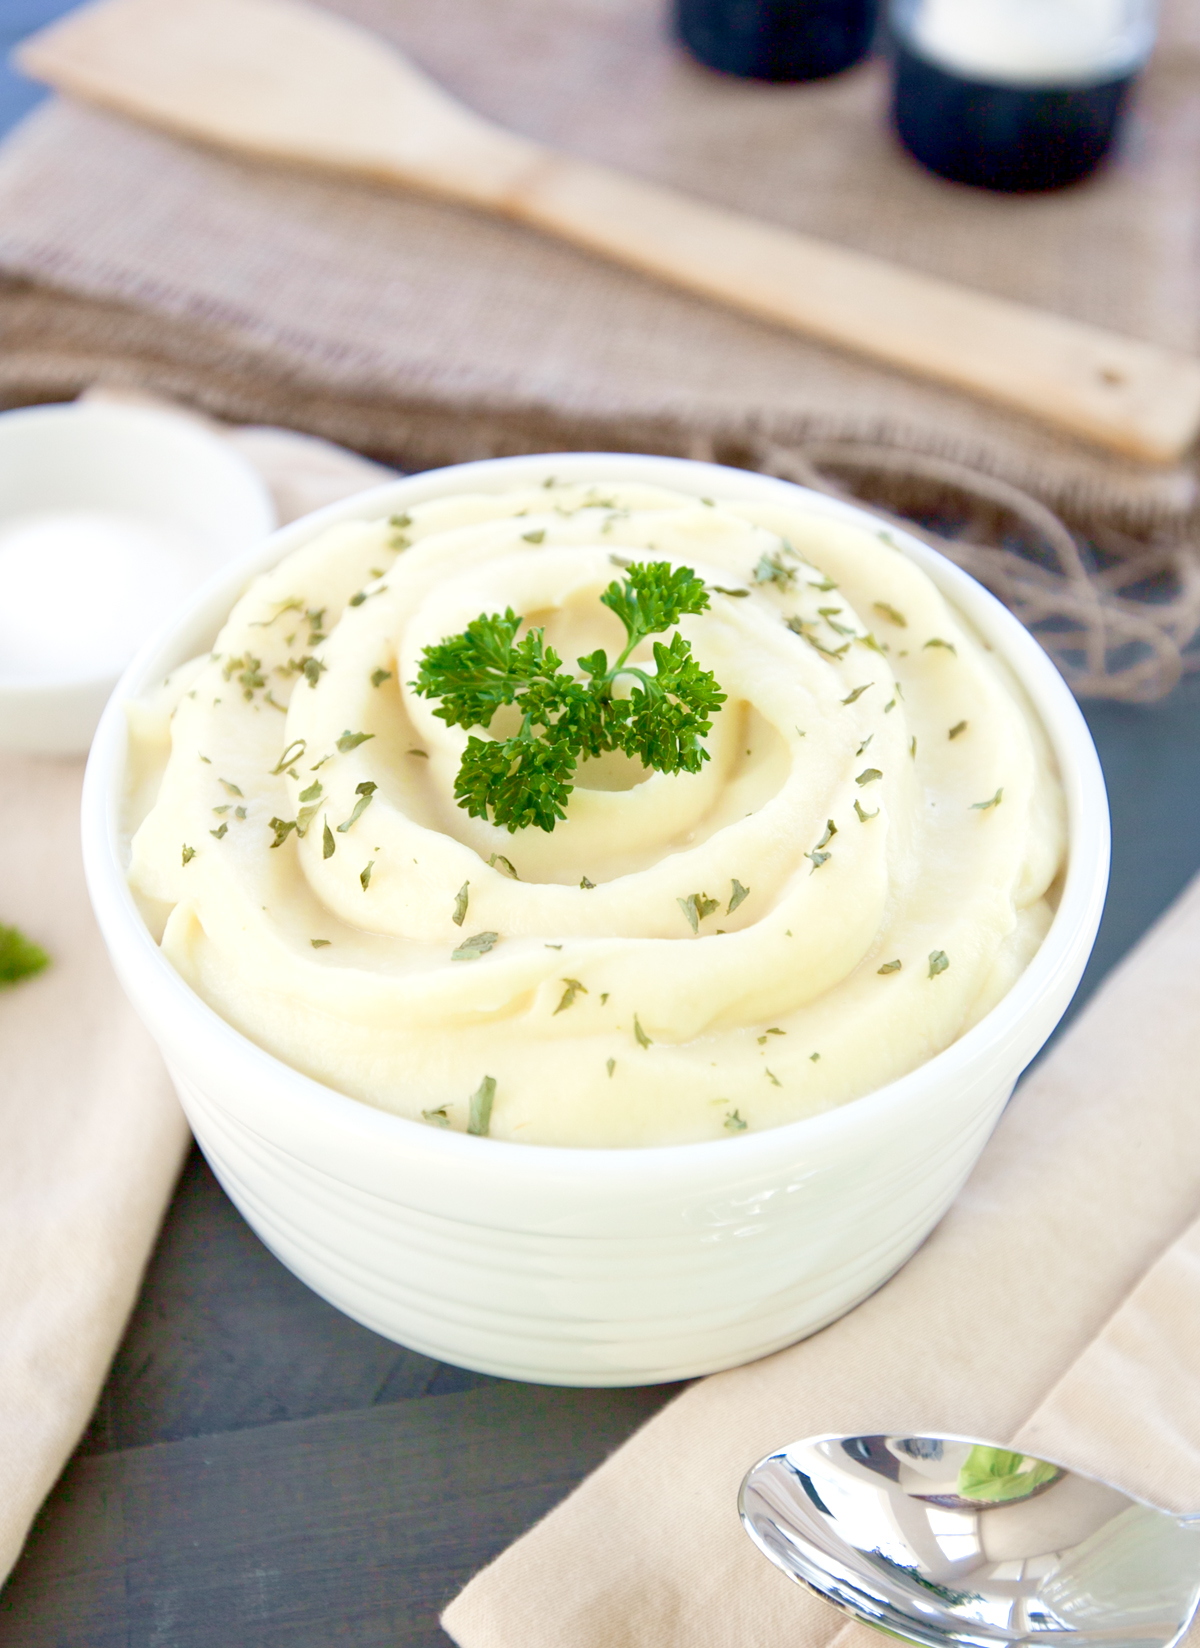 A serving dish of smooth parsnip puree sprinkled with parsley.